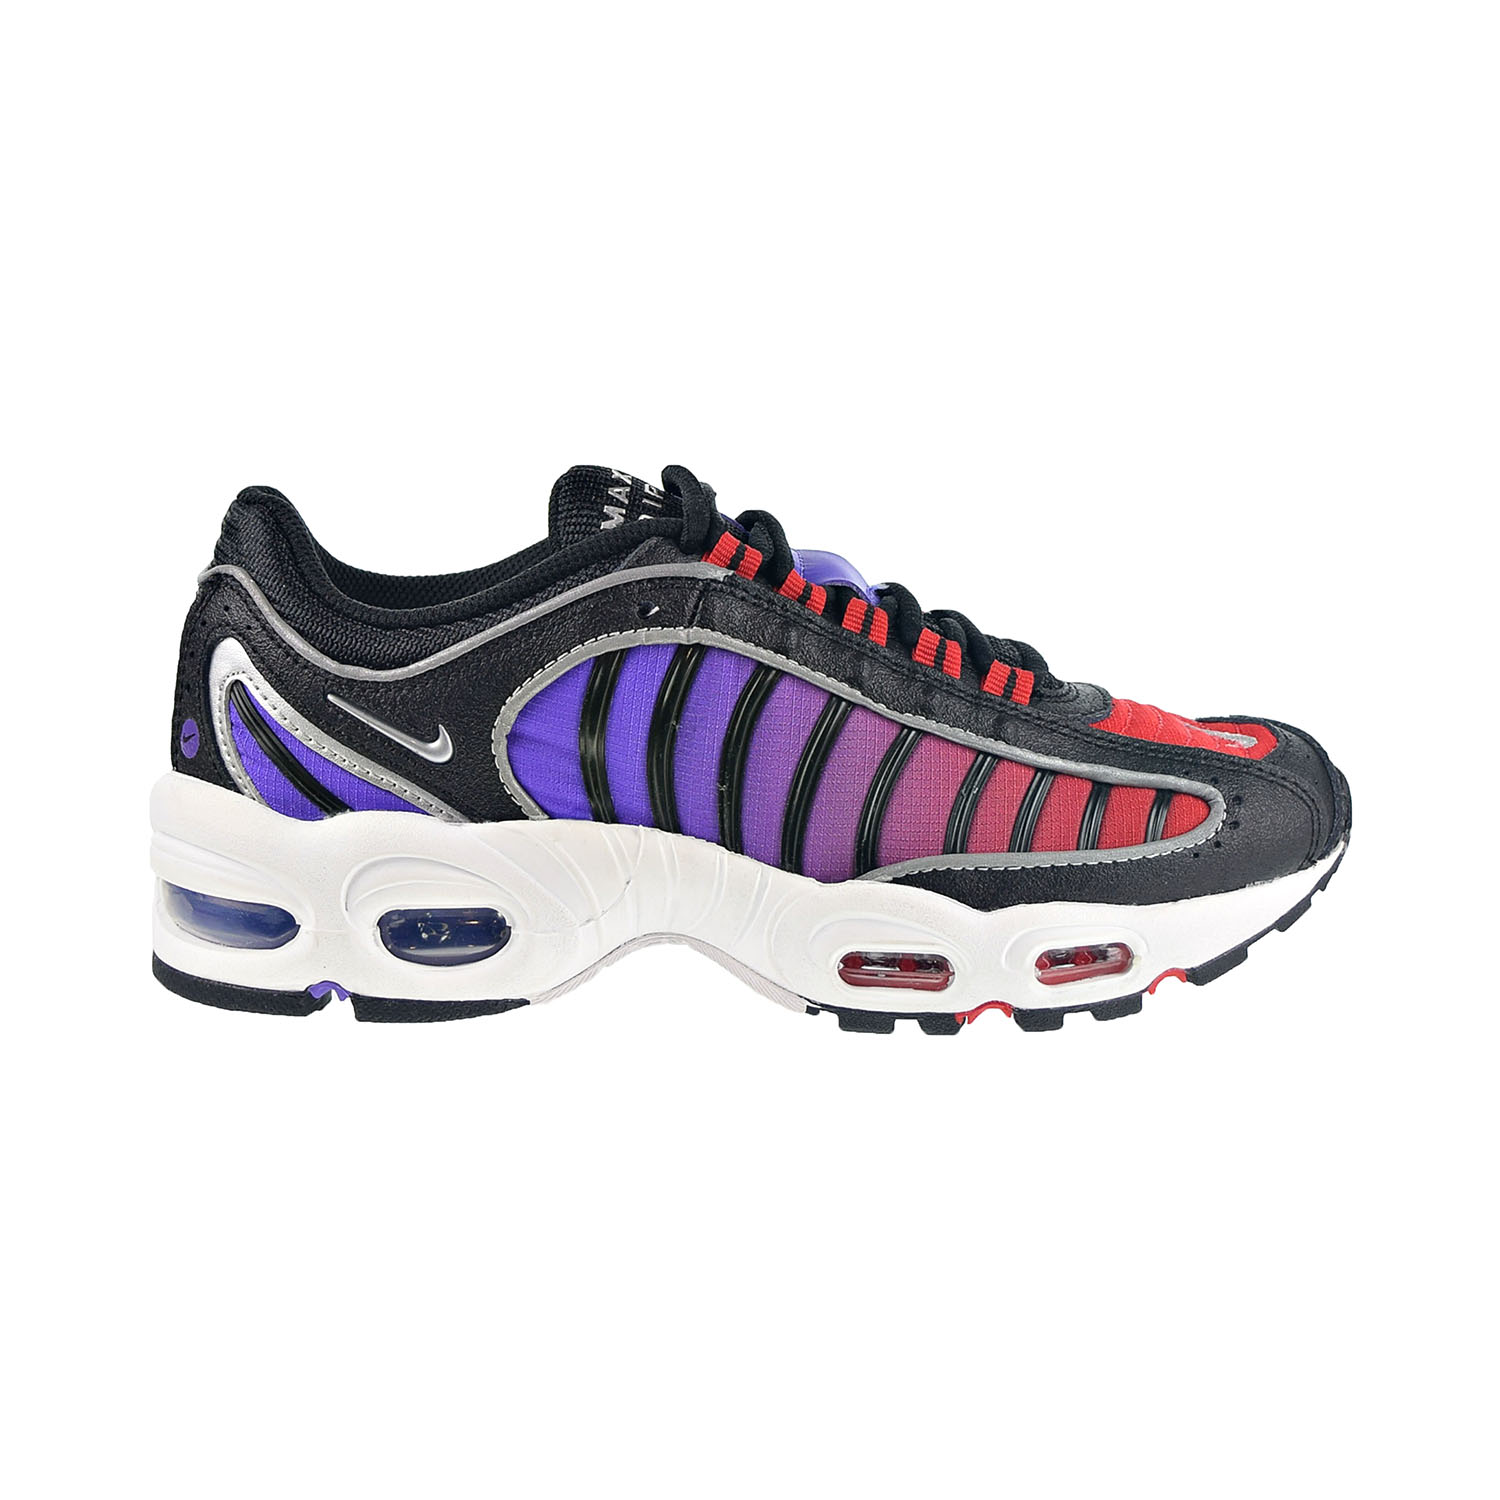 Nike Women's Air Max Tailwind IV Shoes Black-White-University Red-Psychic Purple cq9962-001 - image 1 of 6